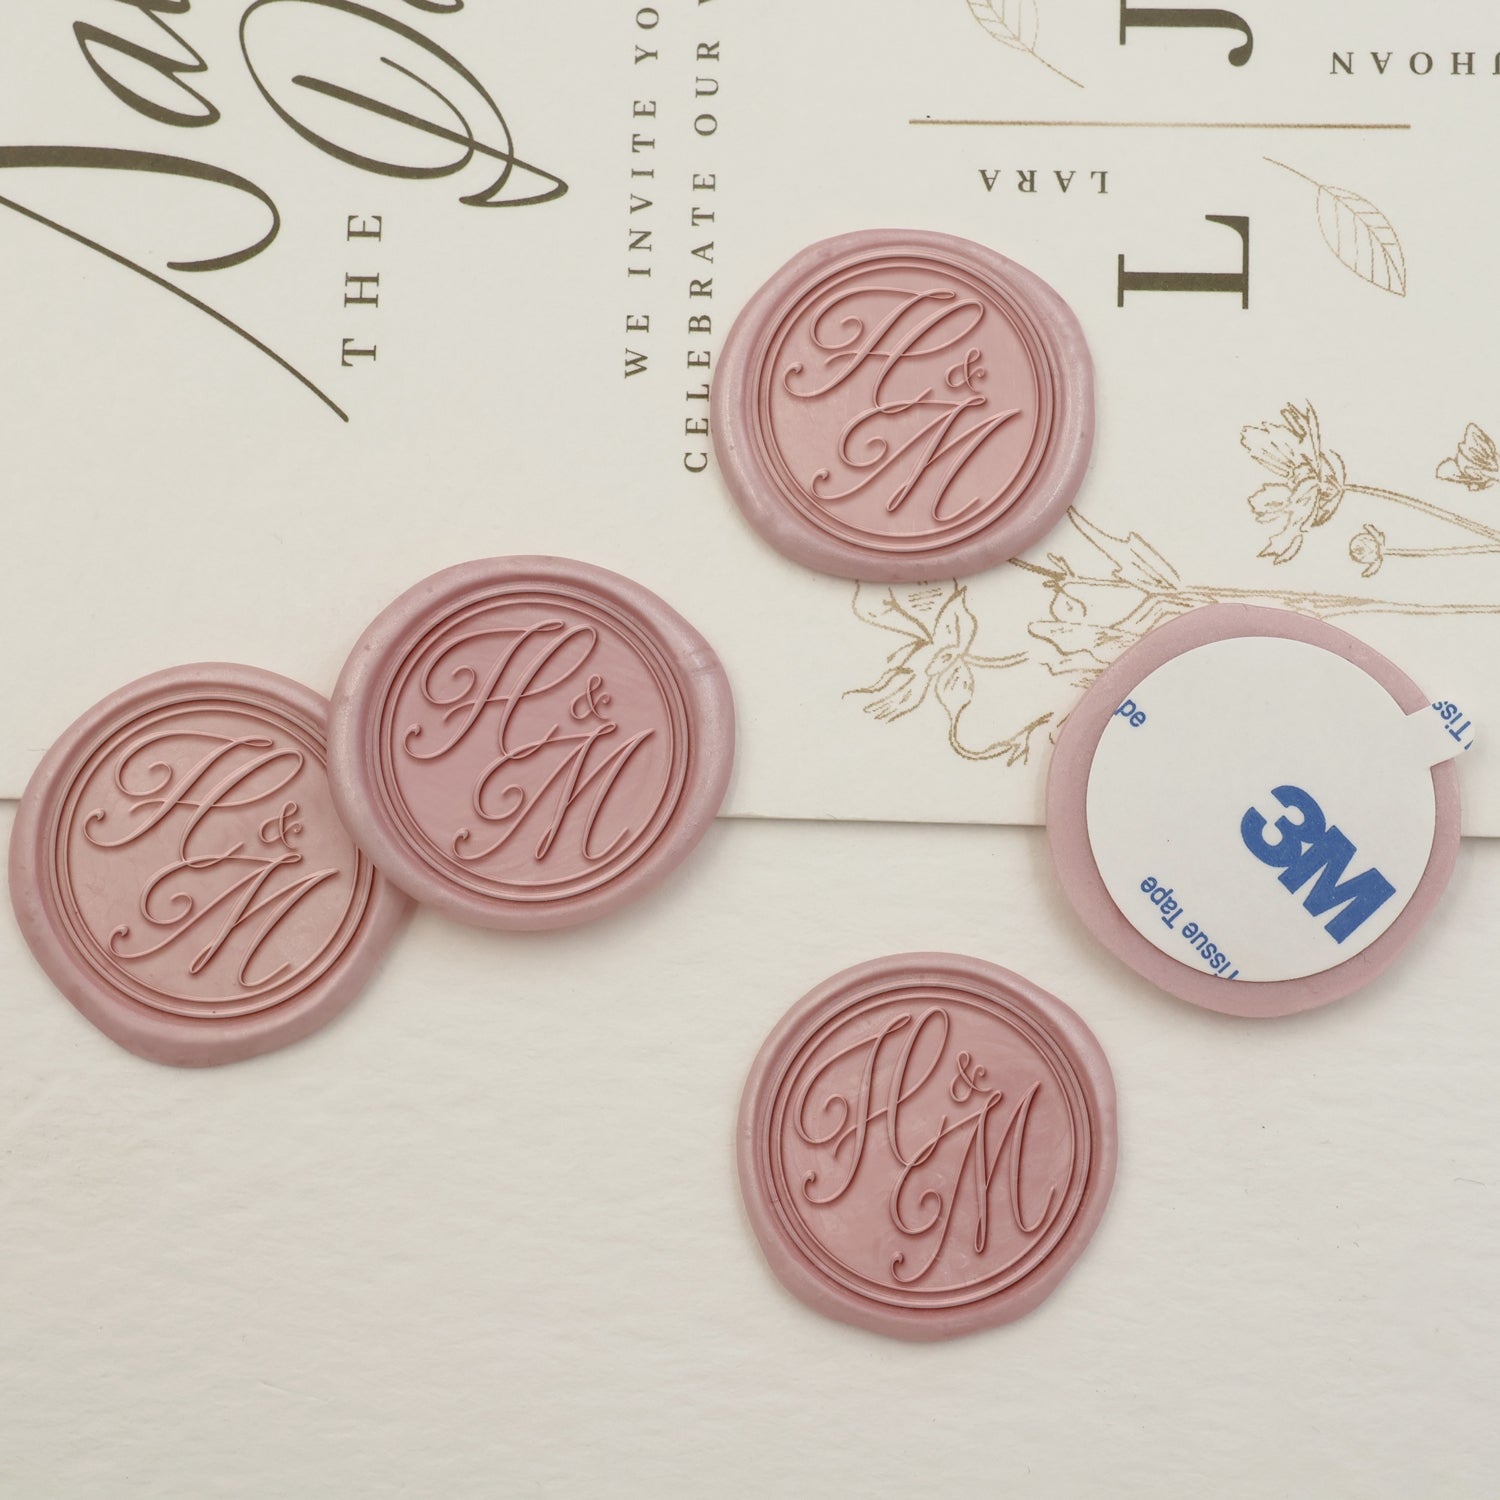 Wedding Custom Self Adhesive Wax Seal Sticker with Double Initials / Couple's Names 4